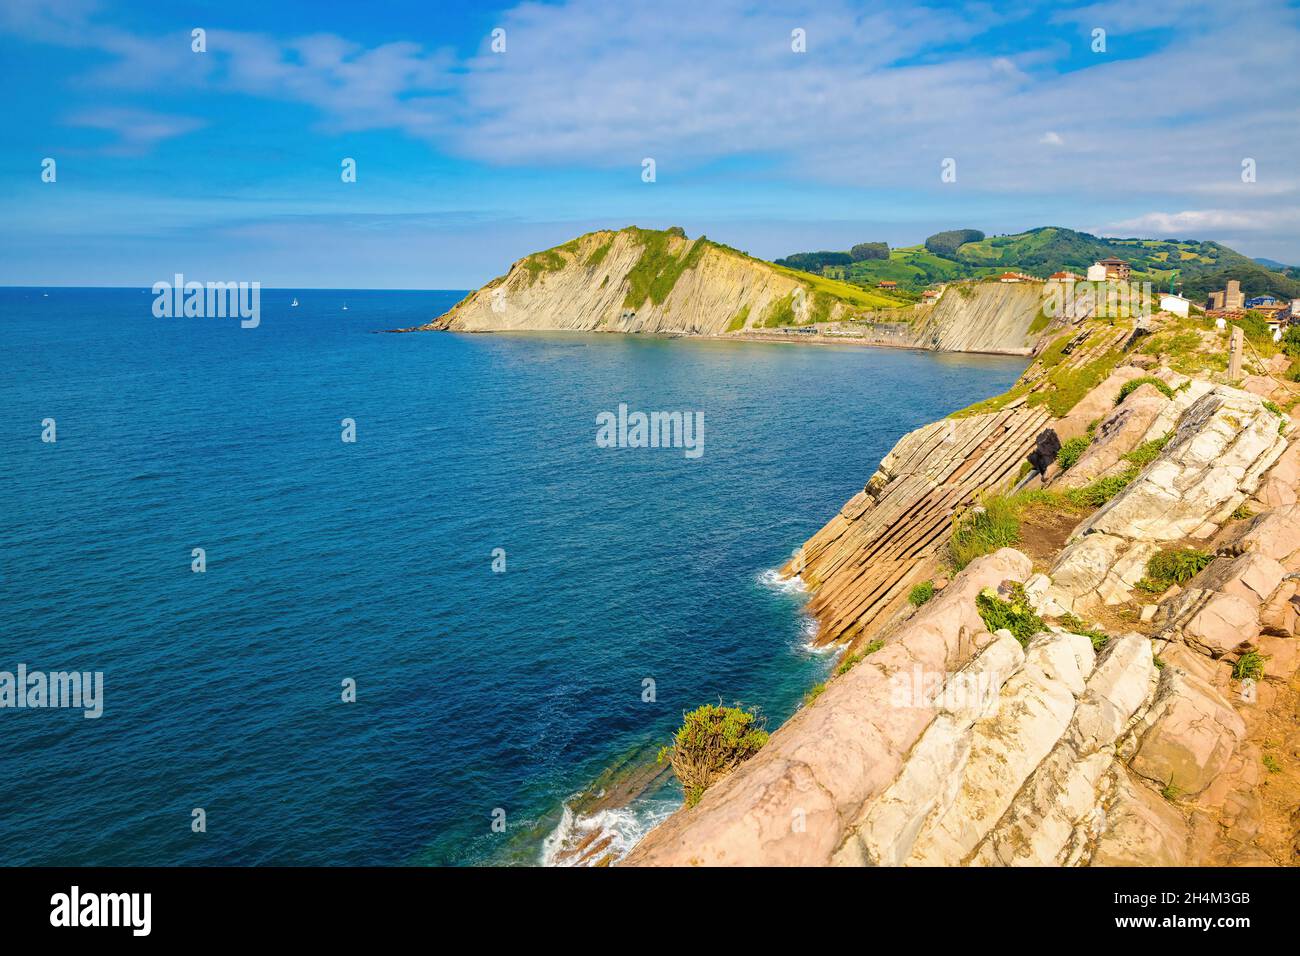 View of the bay of Zumaya with Izurrum beach and the Flysch cliff that protects it. Euskadi, Spain Stock Photo